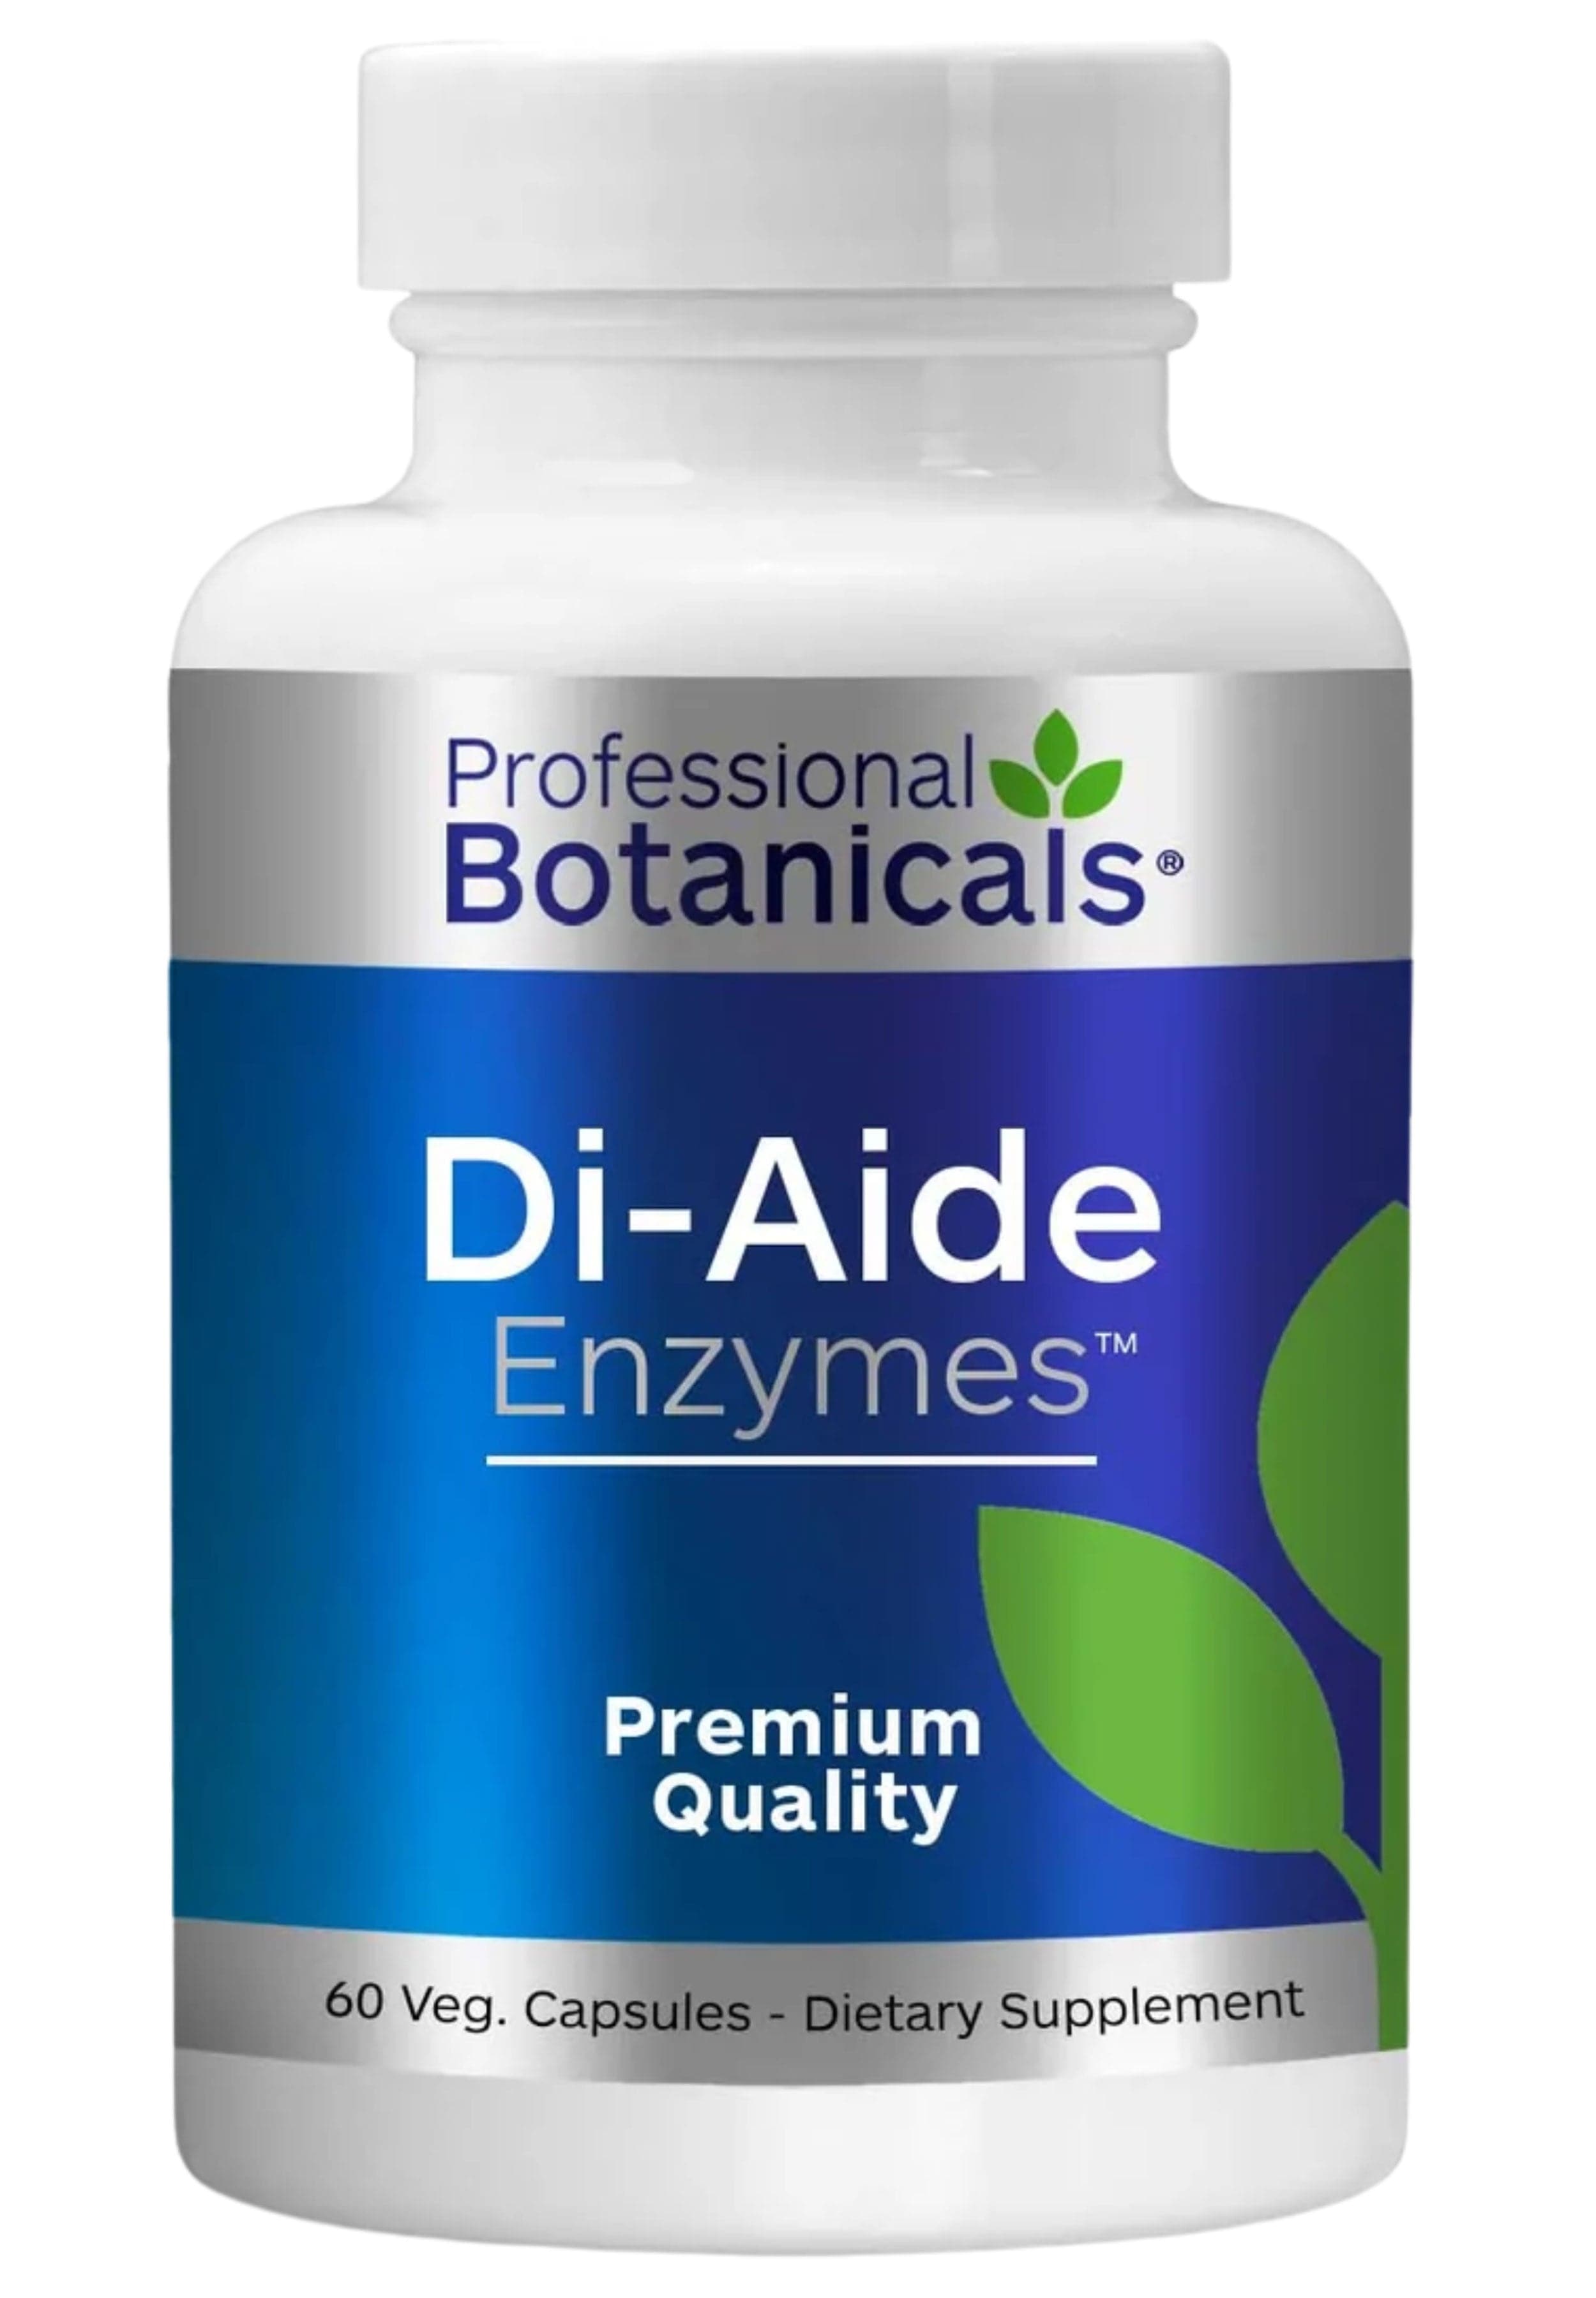 Professional Botanicals Di-Aide Enzymes